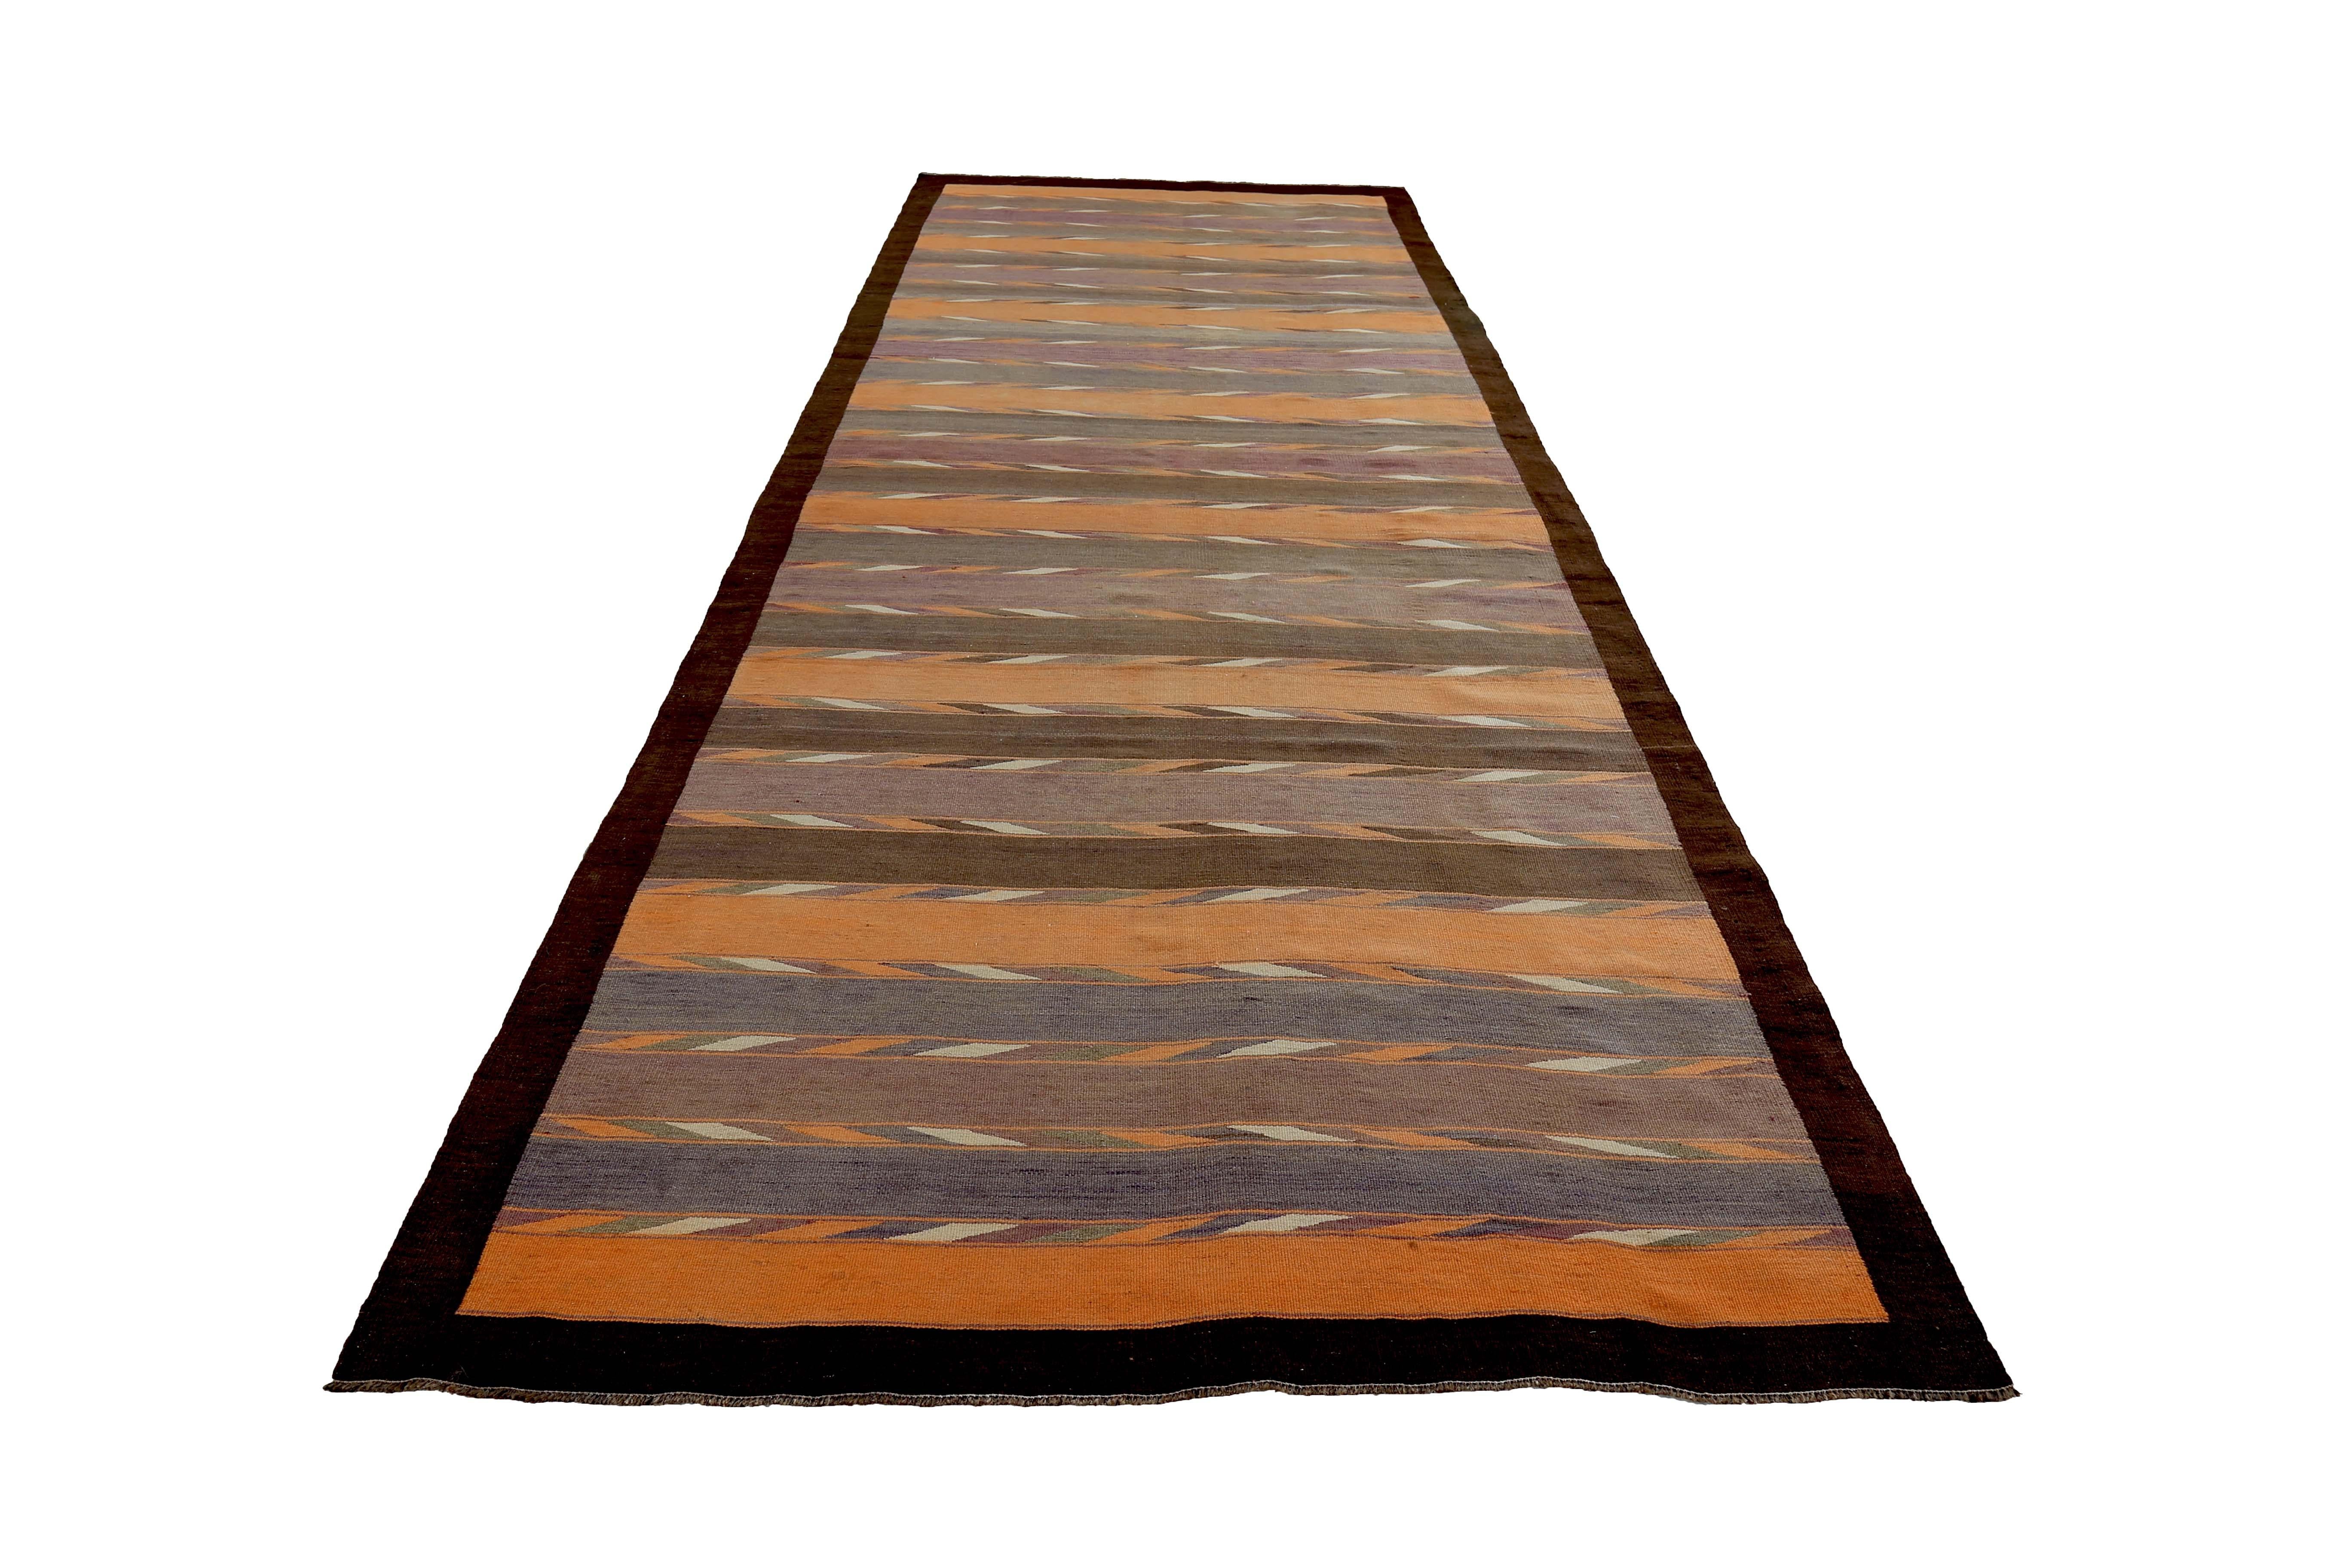 Turkish rug handwoven from the finest sheep’s wool and colored with all-natural vegetable dyes that are safe for humans and pets. It’s a traditional Kilim flat-weave design featuring orange, purple and brown tribal stripes. It’s a stunning piece to